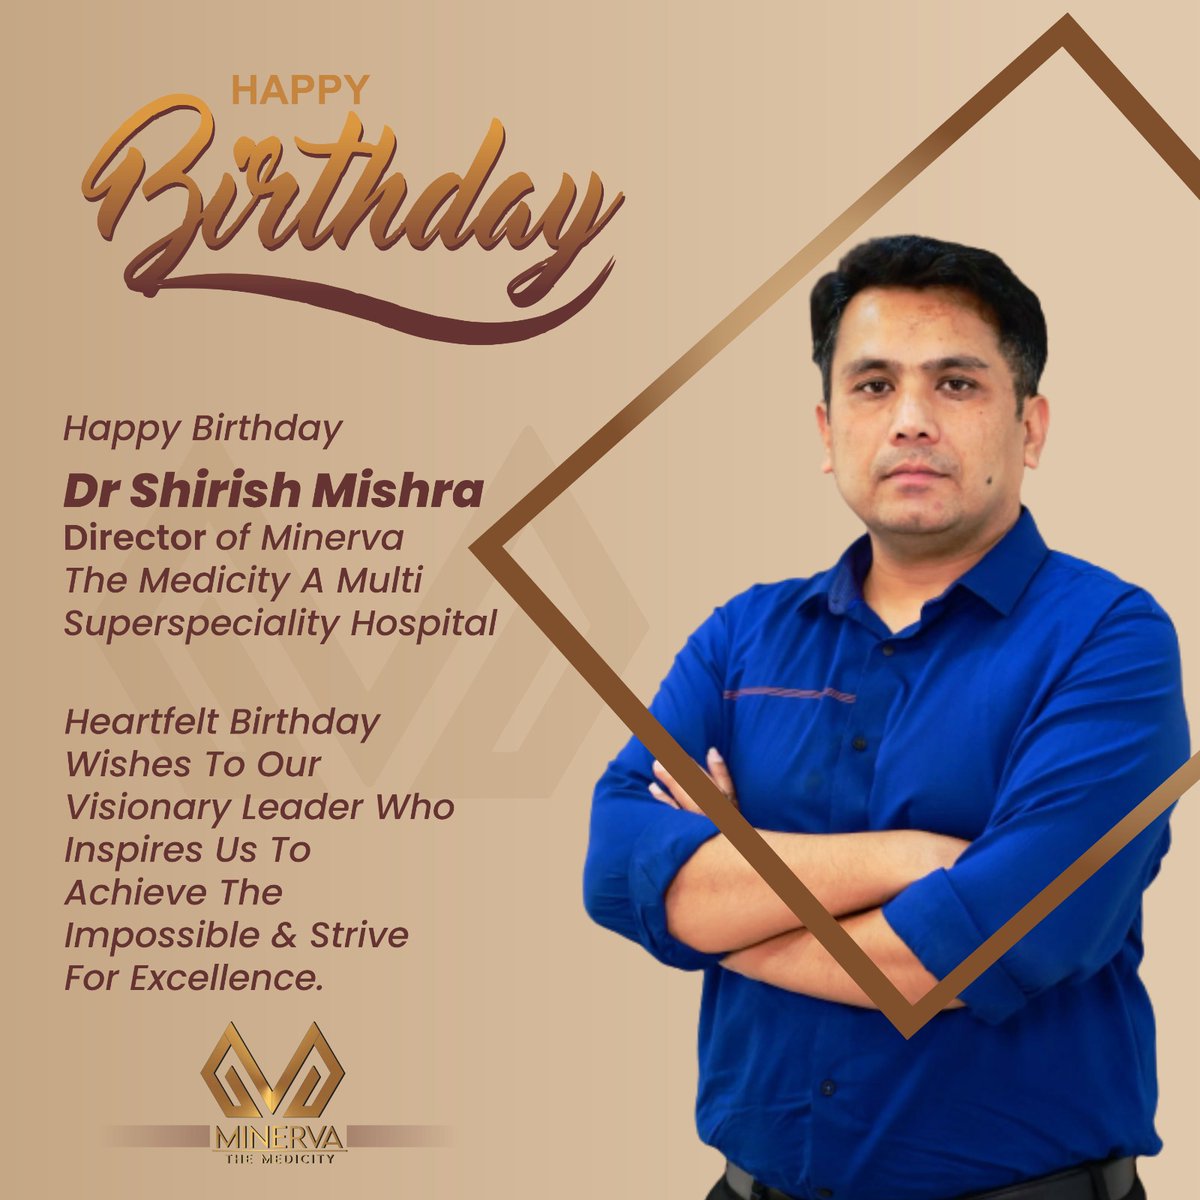 Happy Birthday To You ON YOUR BIRTHDAY WE WISH THAT THE ALMIGHTY BLESS YOU WITH GOODLUCK, HAPPINESS, LOVE, GOOD HEALTH AND SUCCESS IN EVERY WORK OF YOUR LIFE.

#happybirthday #birthday #minervathemedicity #minervahospital #besthospital #bestdoctors
#healthcamp #freehealthcamp